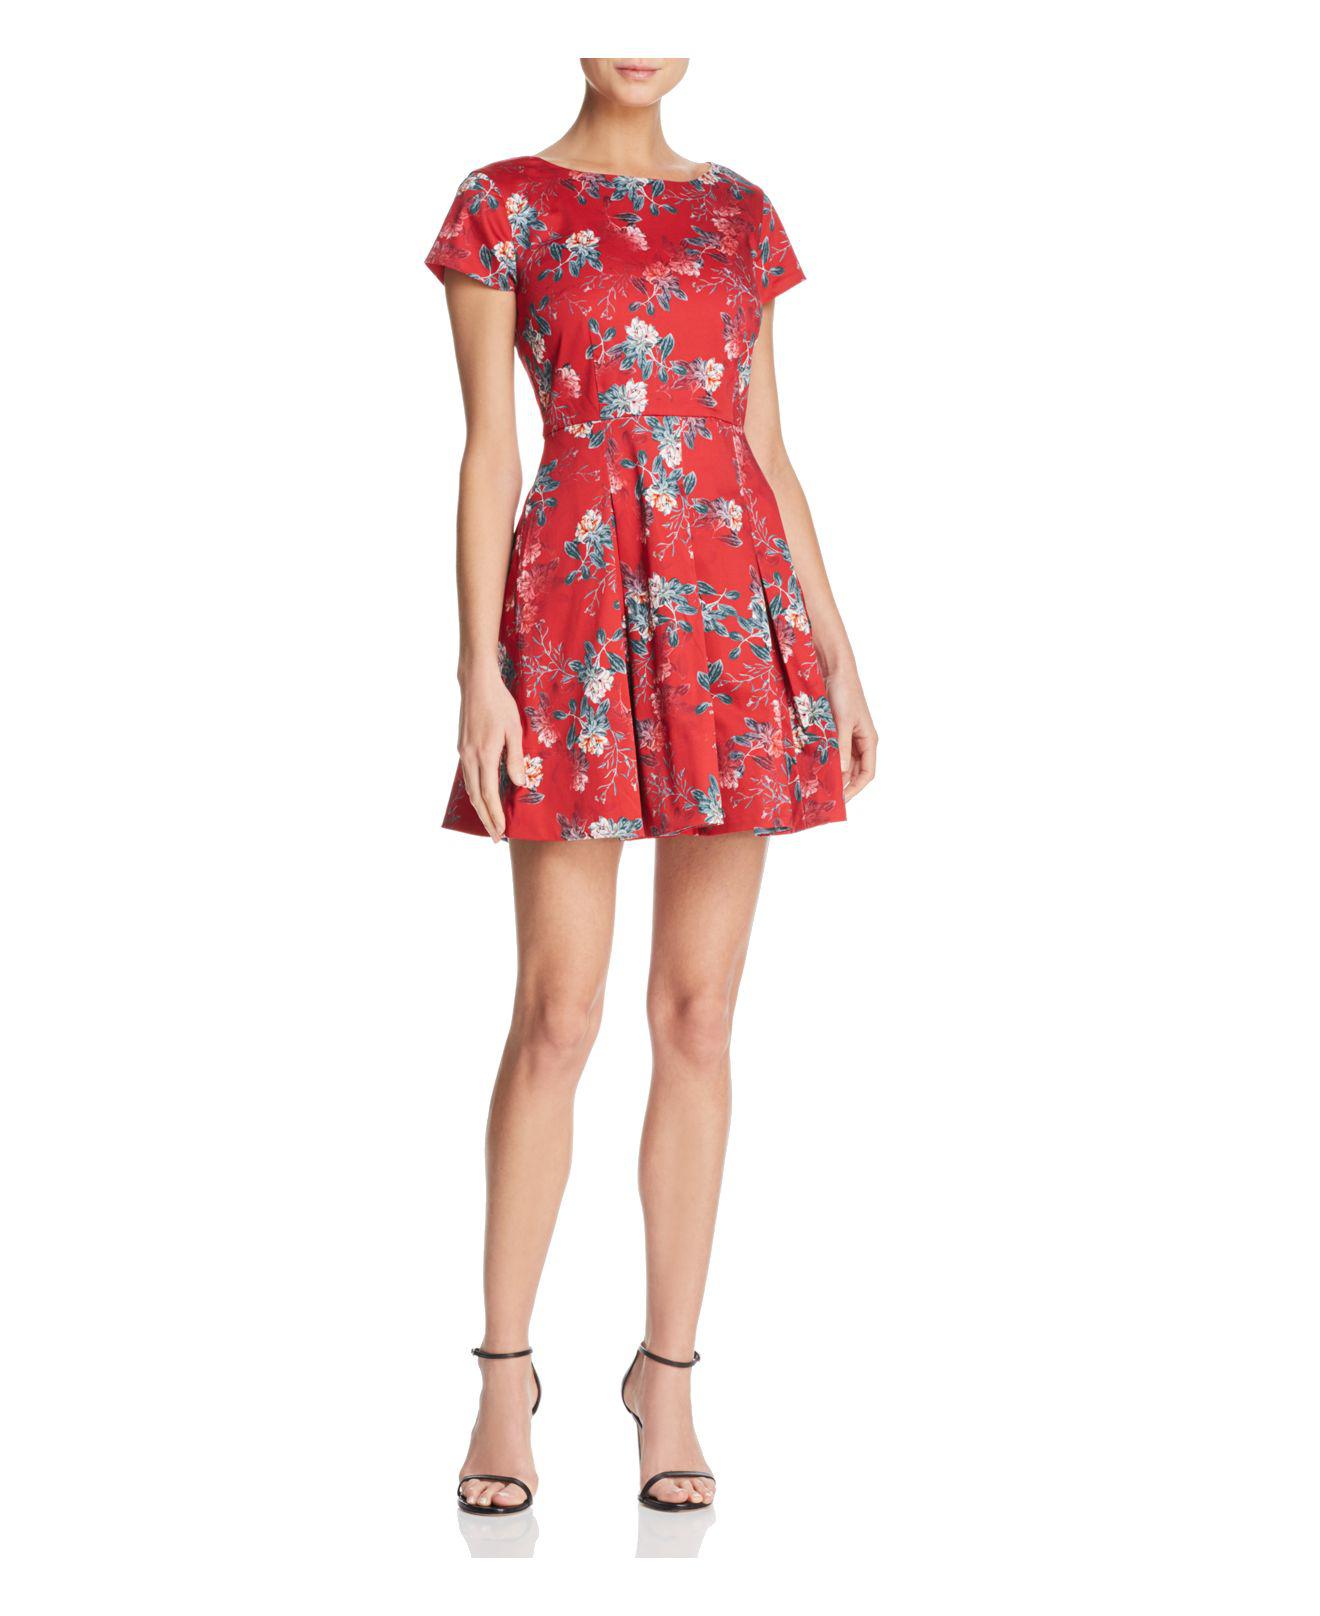 french connection red floral dress